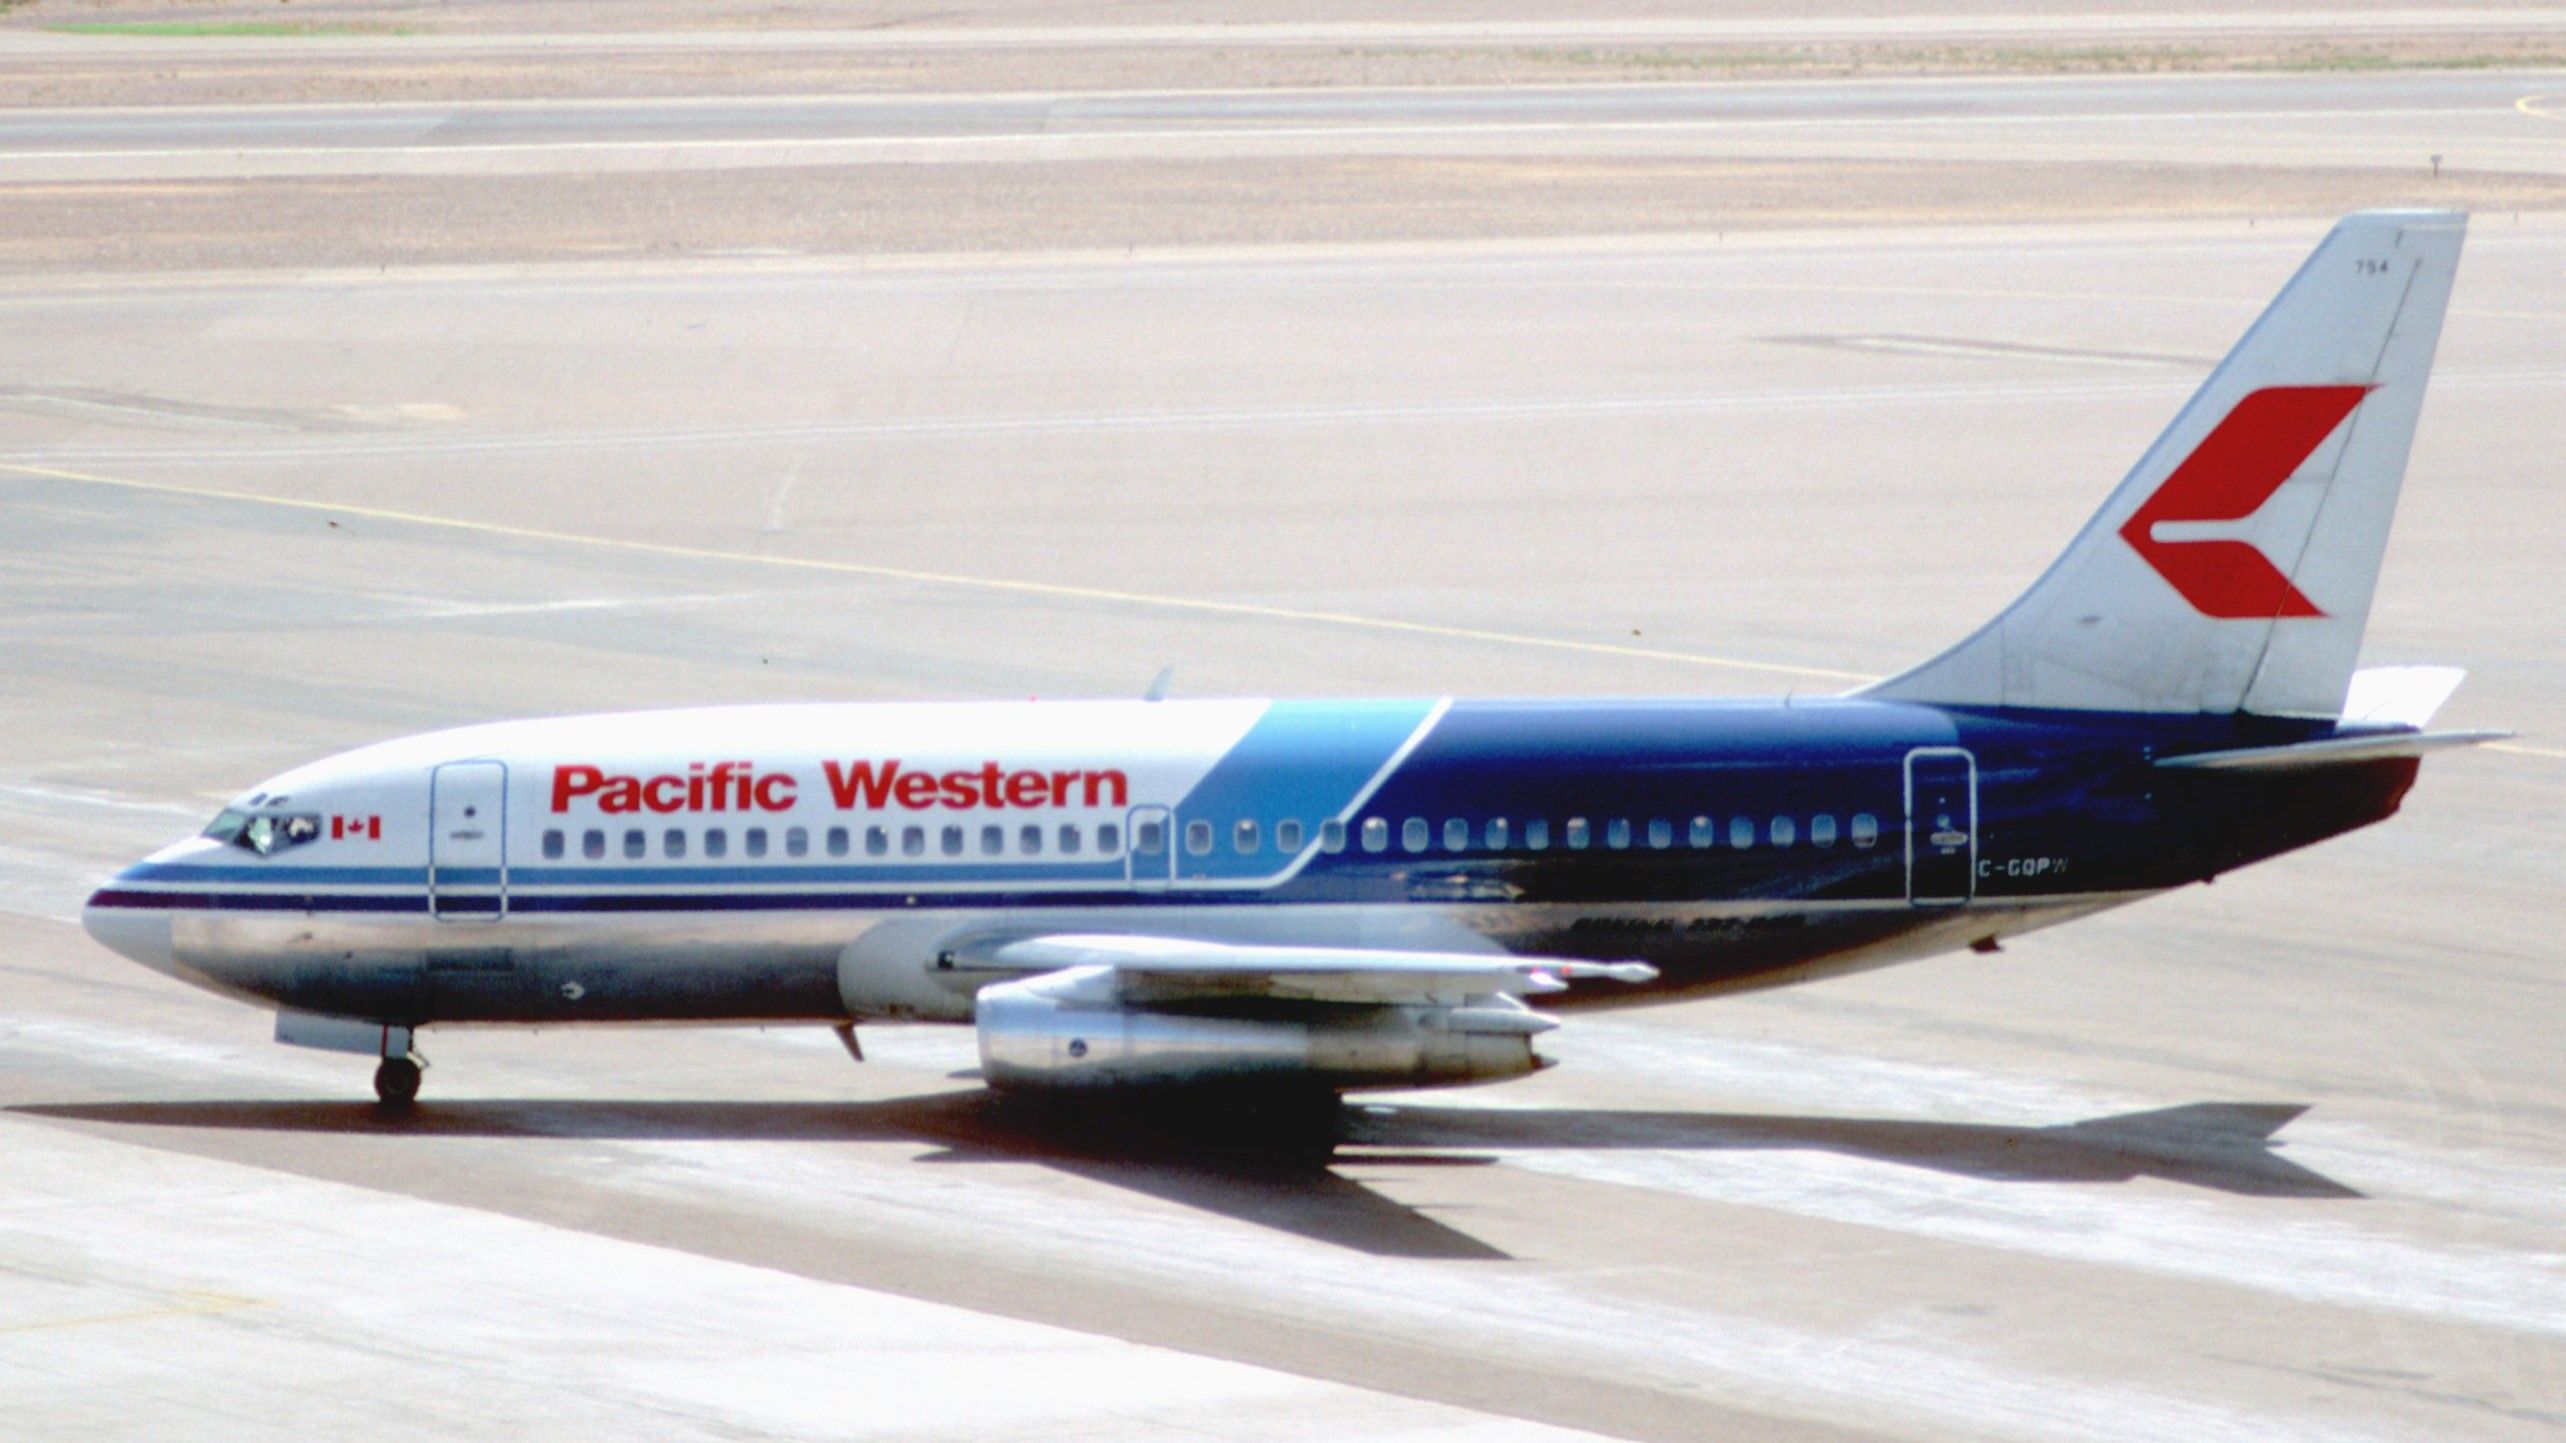 A Pacific Western Airlines Boeing 737-200 on an airport apron.